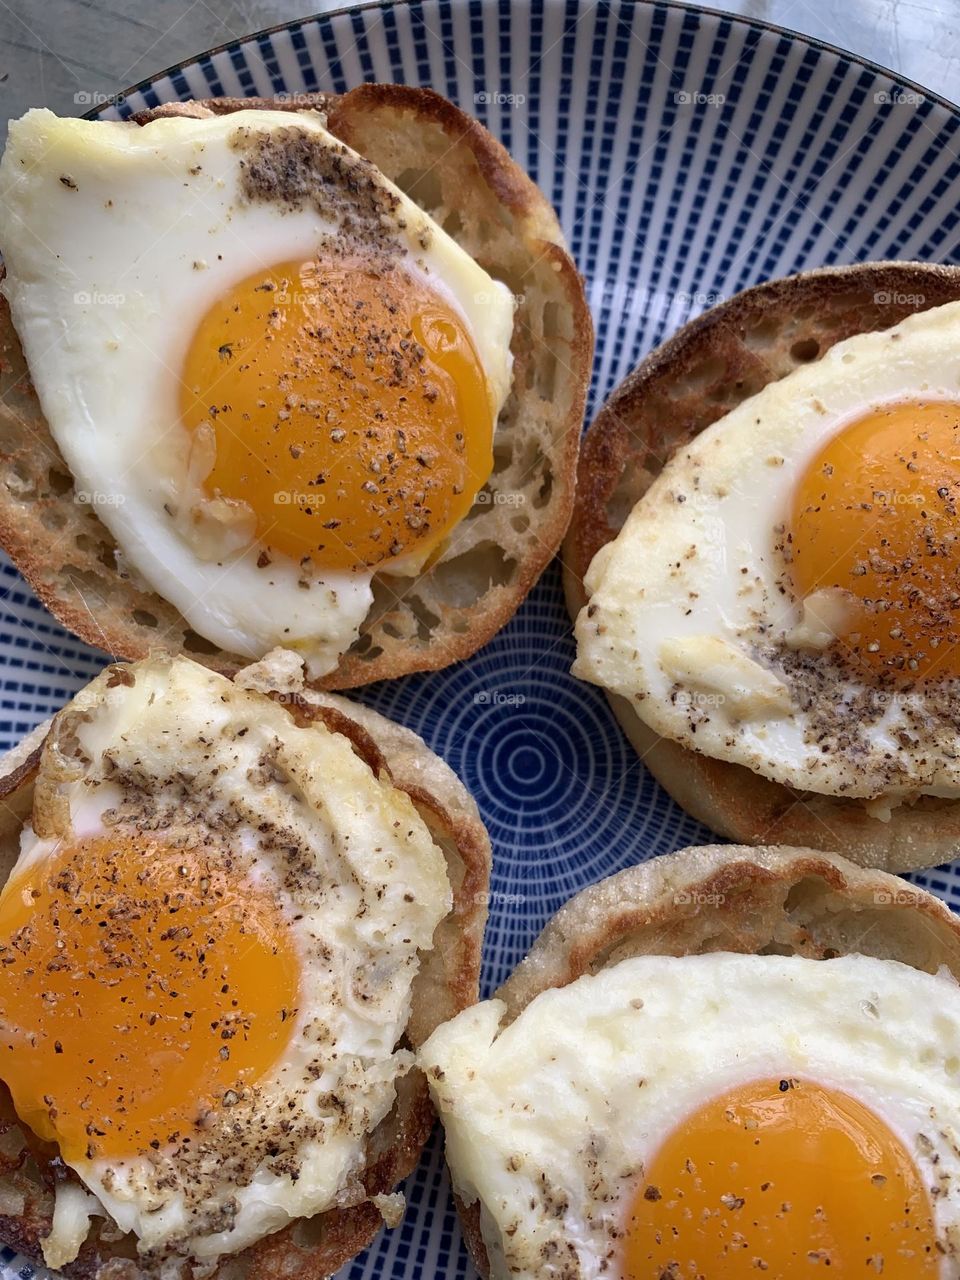 Fried eggs on muffins